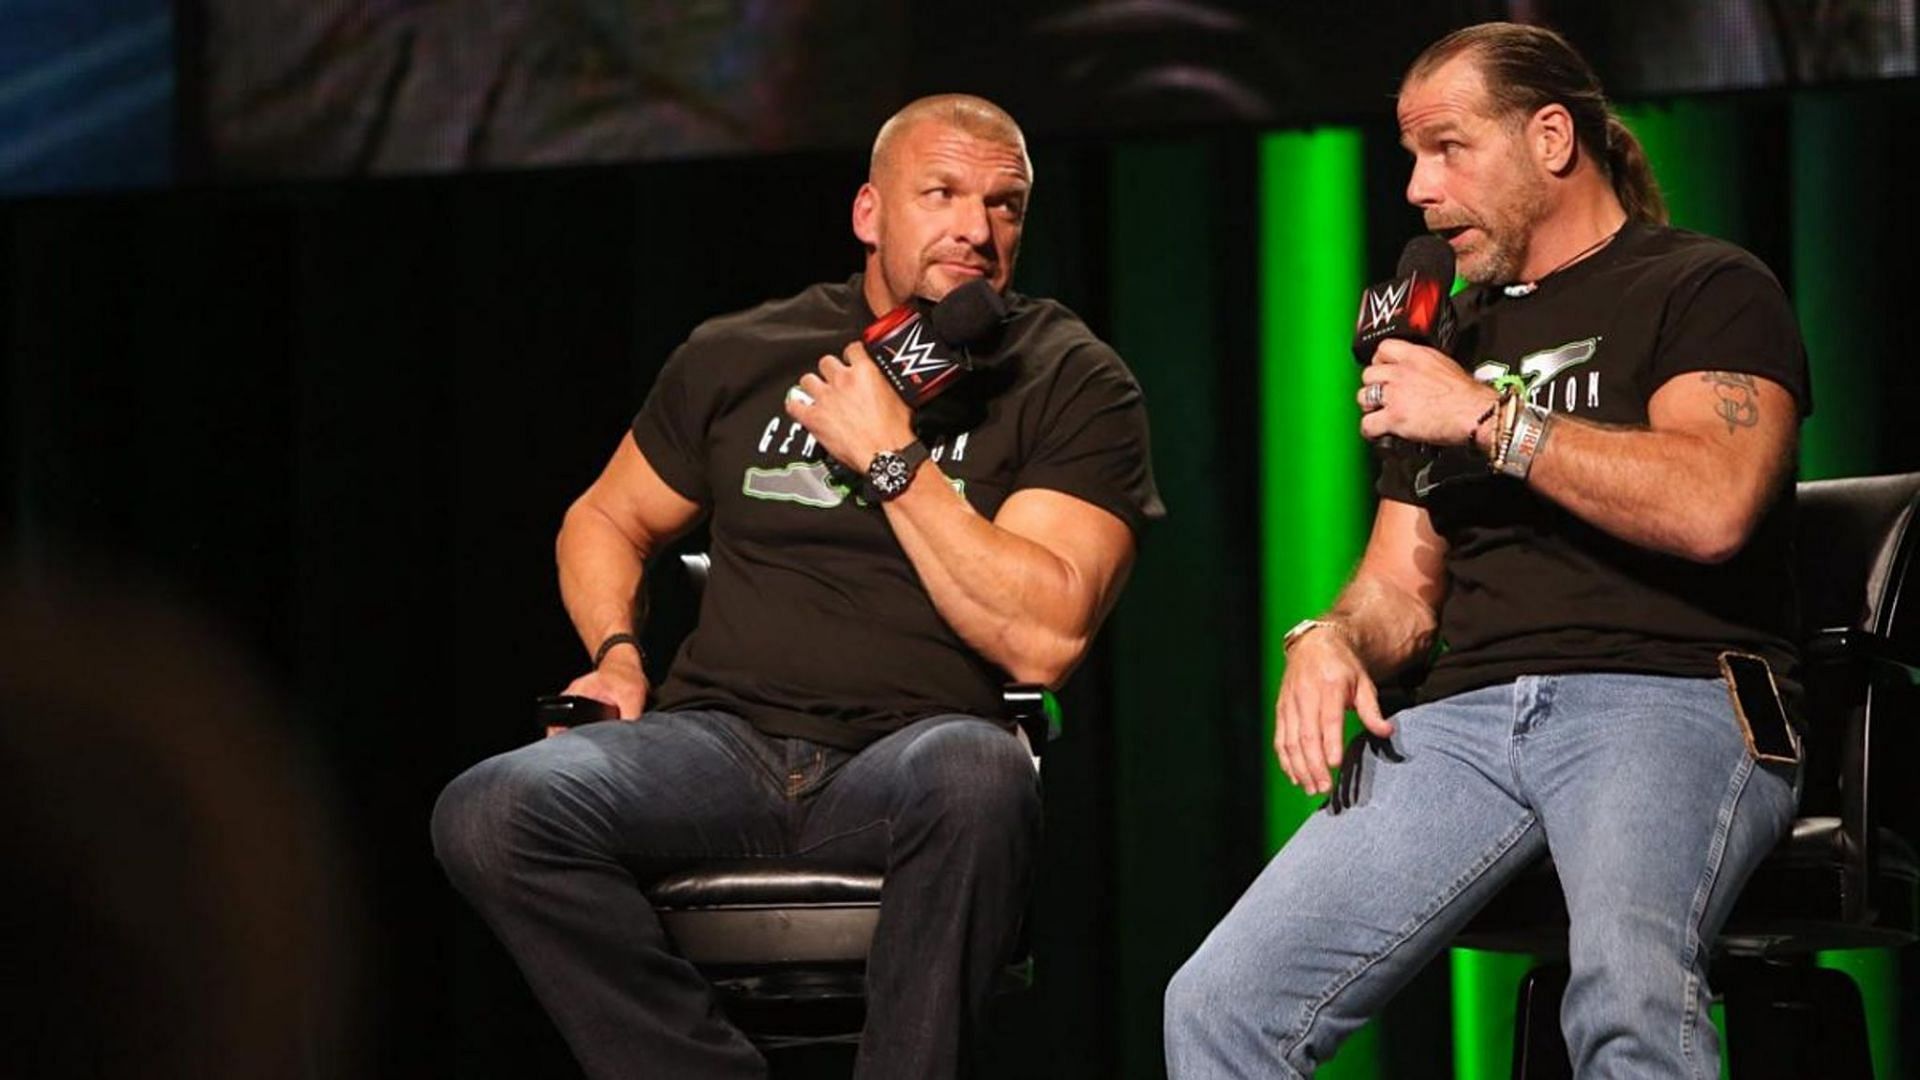 Triple H and Shawn Michaels are members of the faction D-Generation X